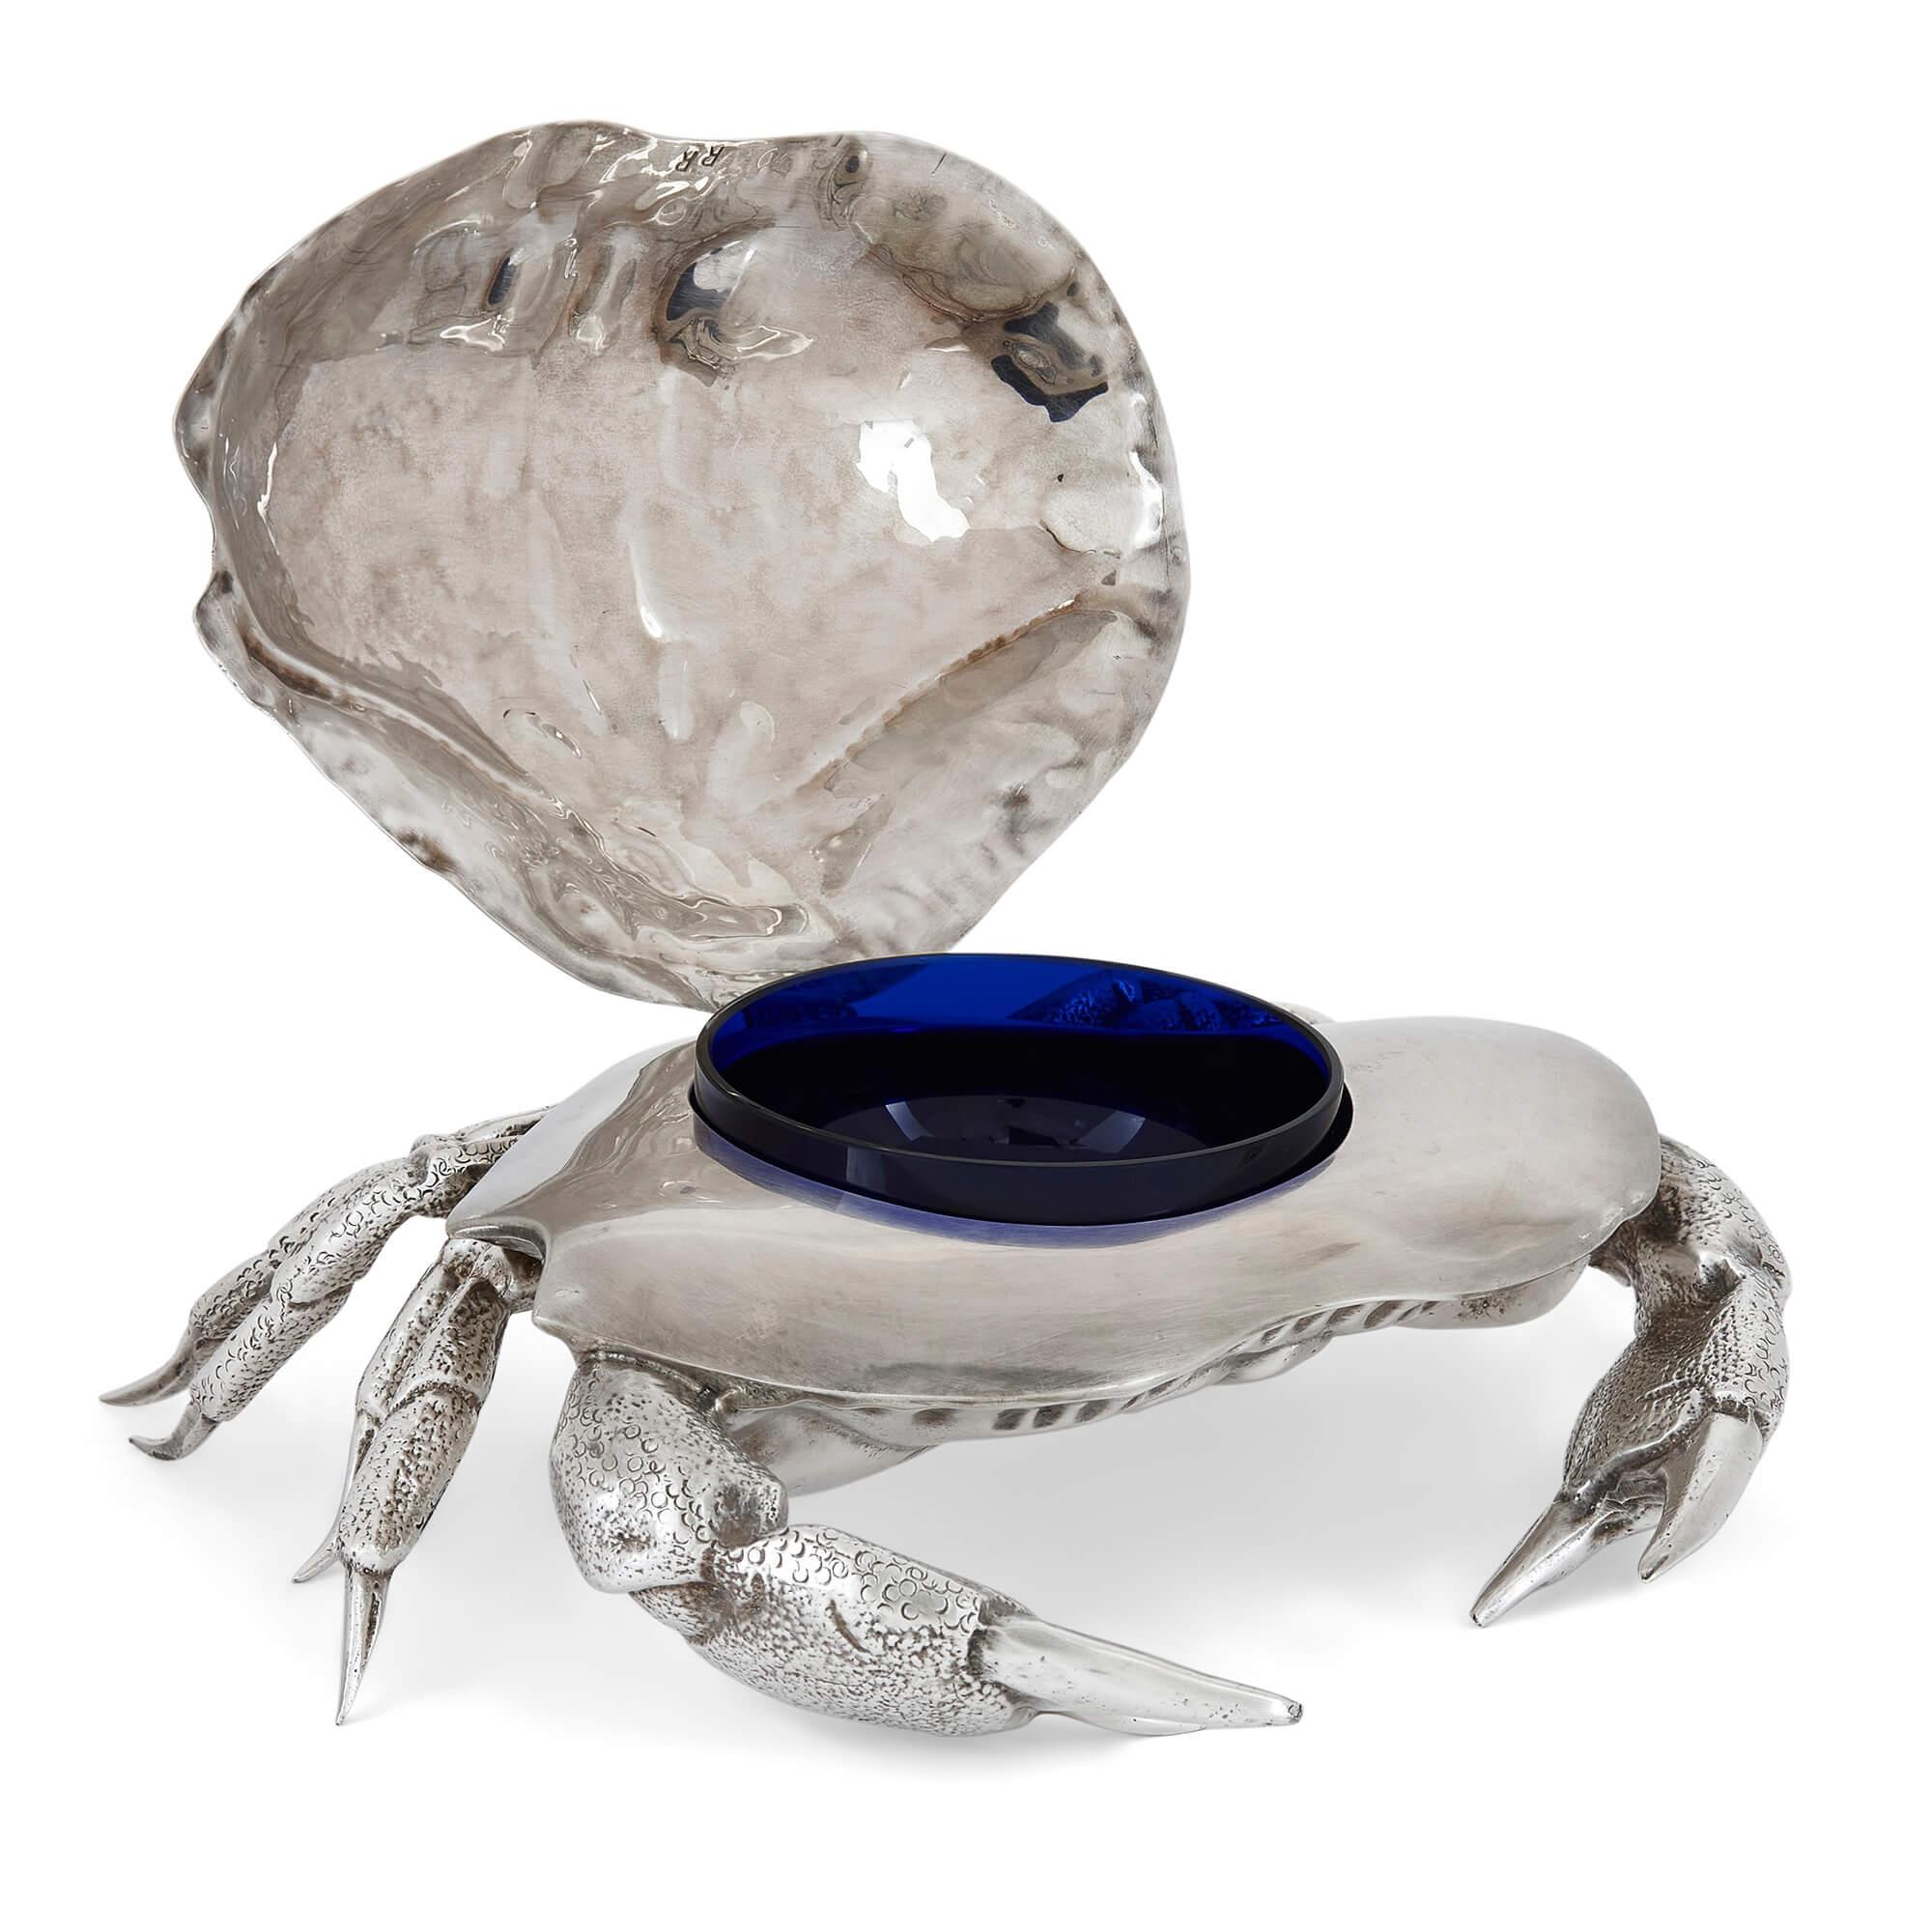 Renaissance Revival Italian Silver-Plated Crab-Form Caviar Dish Attributed to Franco Lapini For Sale